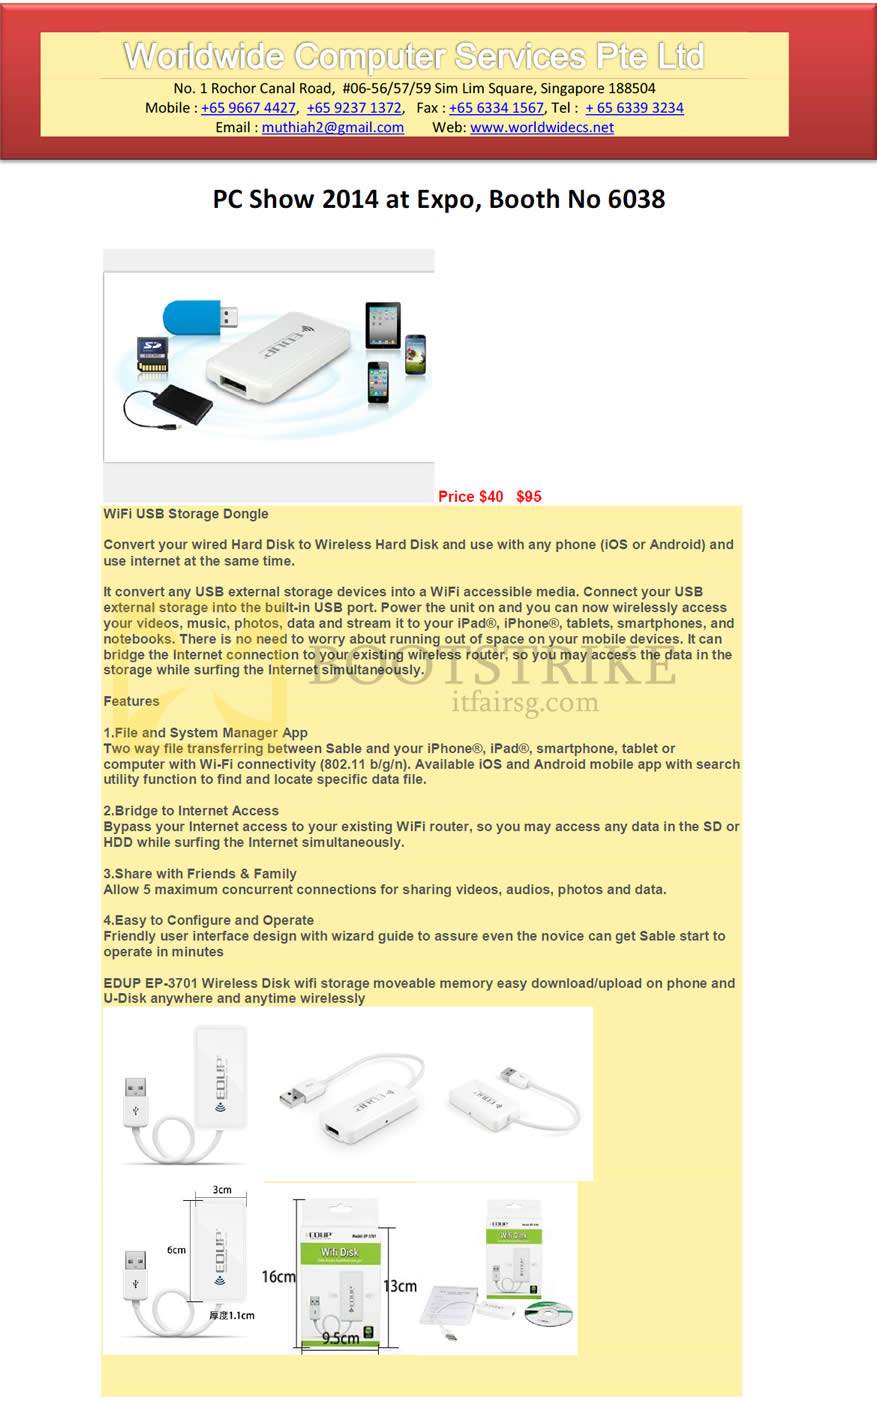 PC SHOW 2014 price list image brochure of Worldwide Computer Services Wifi USB Storage Dongle